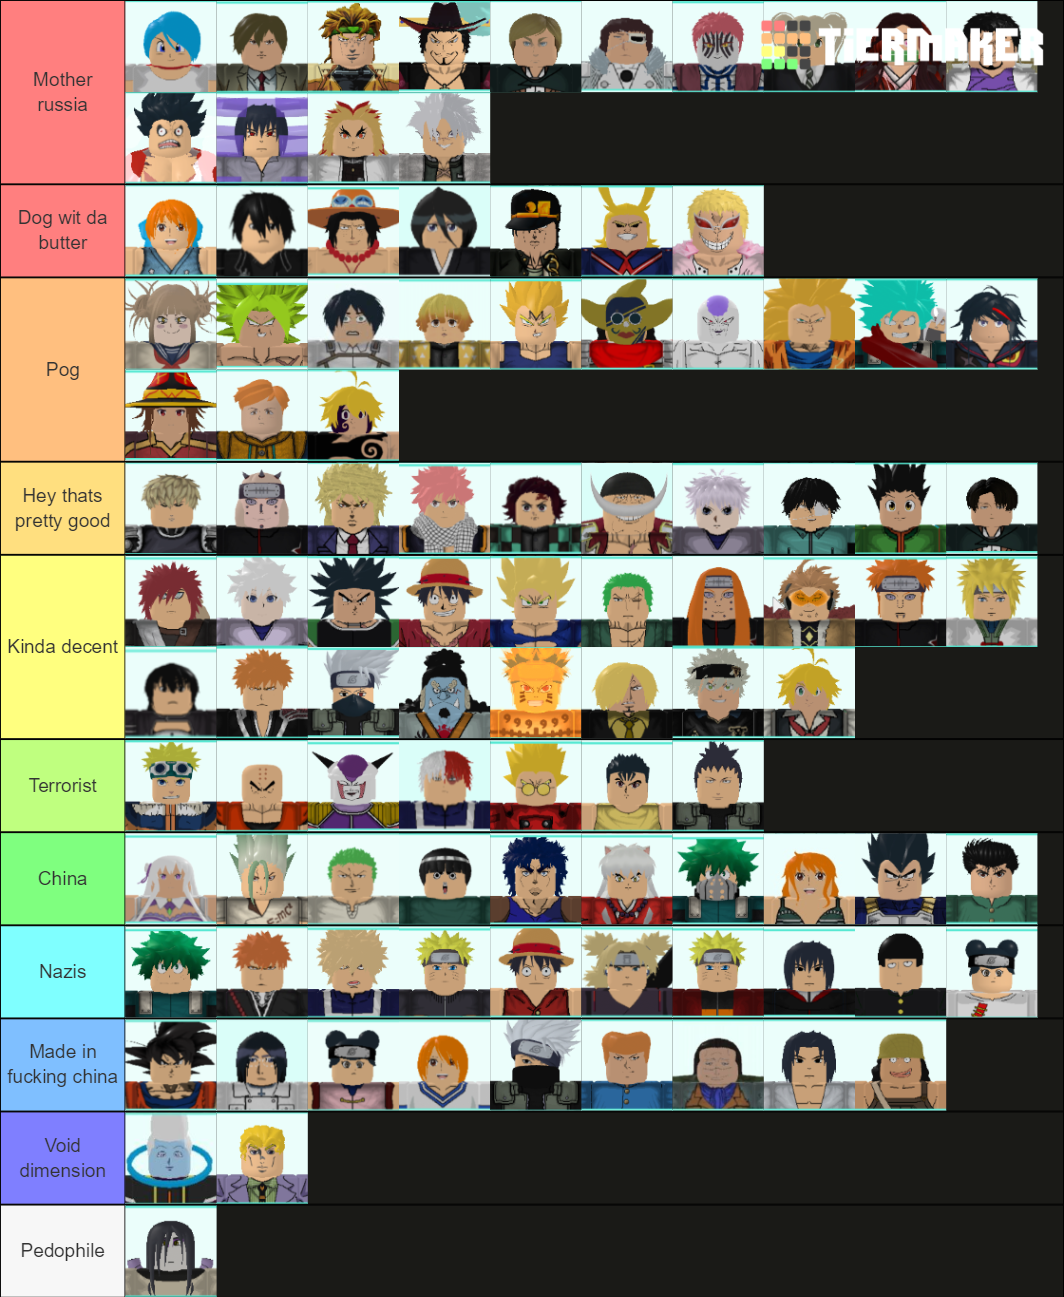 Trading Tier List, Roblox: All Star Tower Defense Wiki